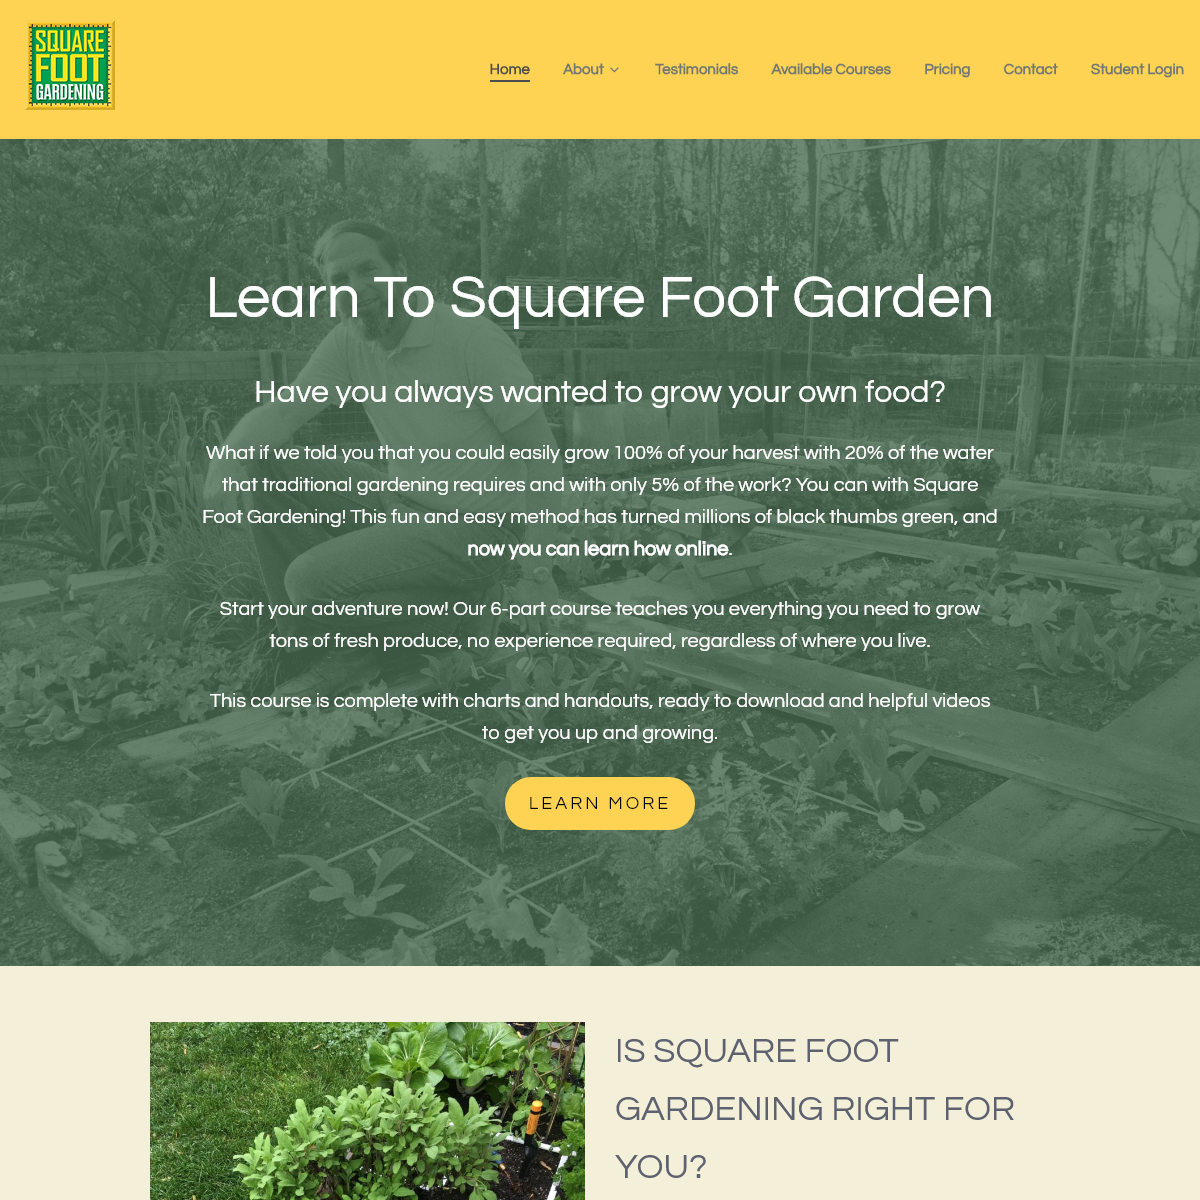 A complete backup of squarefootgardening.com